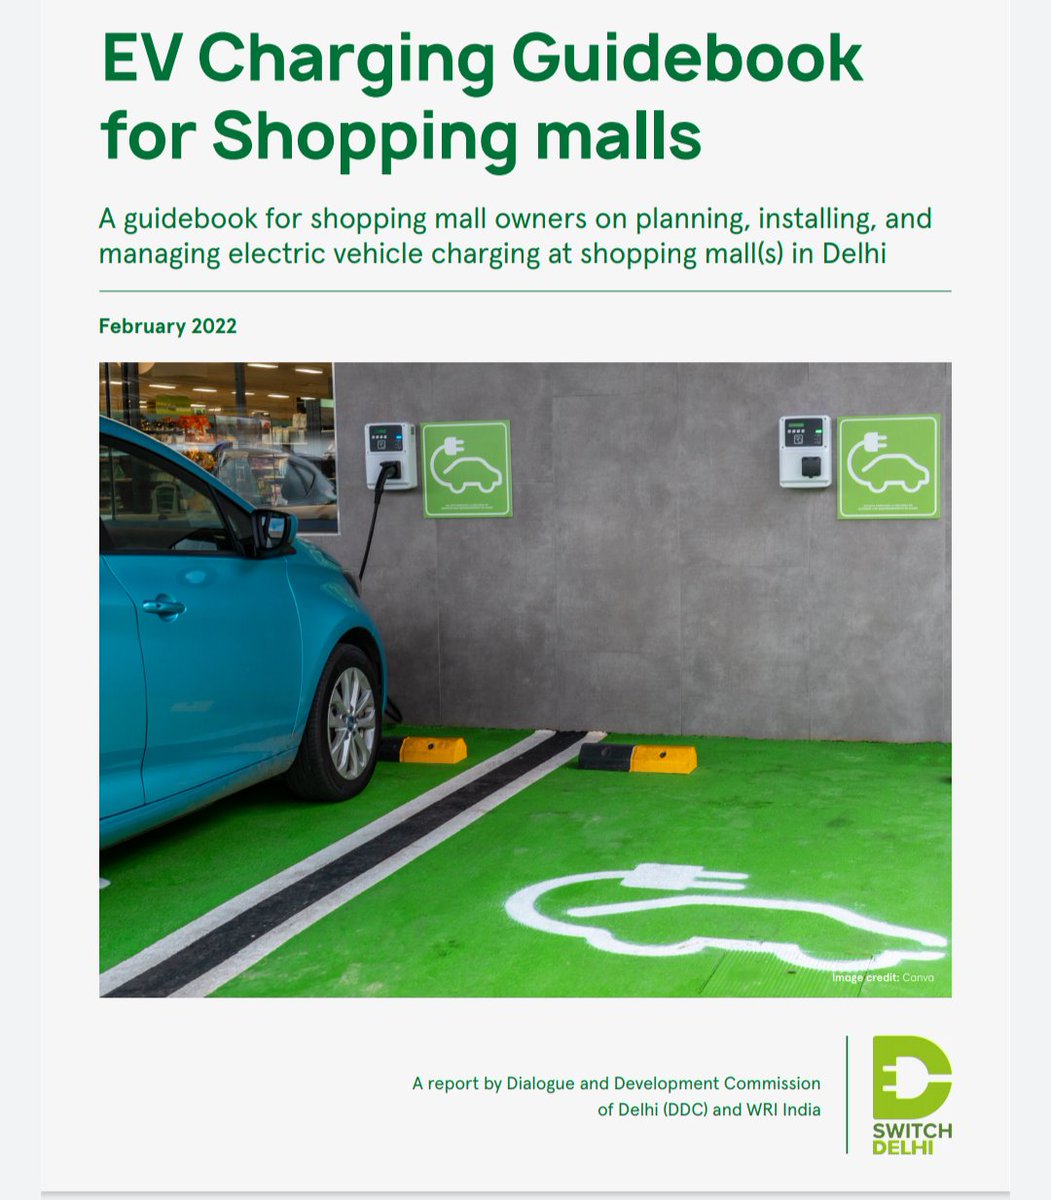 An average customer spends around 90 mins inside shopping malls in #Delhi. That's fantastic oppertunity to charge the #EV. This is a win-win for consumers and mall owners. Fantastic leadership @ArvindKejriwal, @kgahlot @Jasmine441 timesofindia.indiatimes.com/city/delhi/gov… @DDC_Delhi @WRIIndia